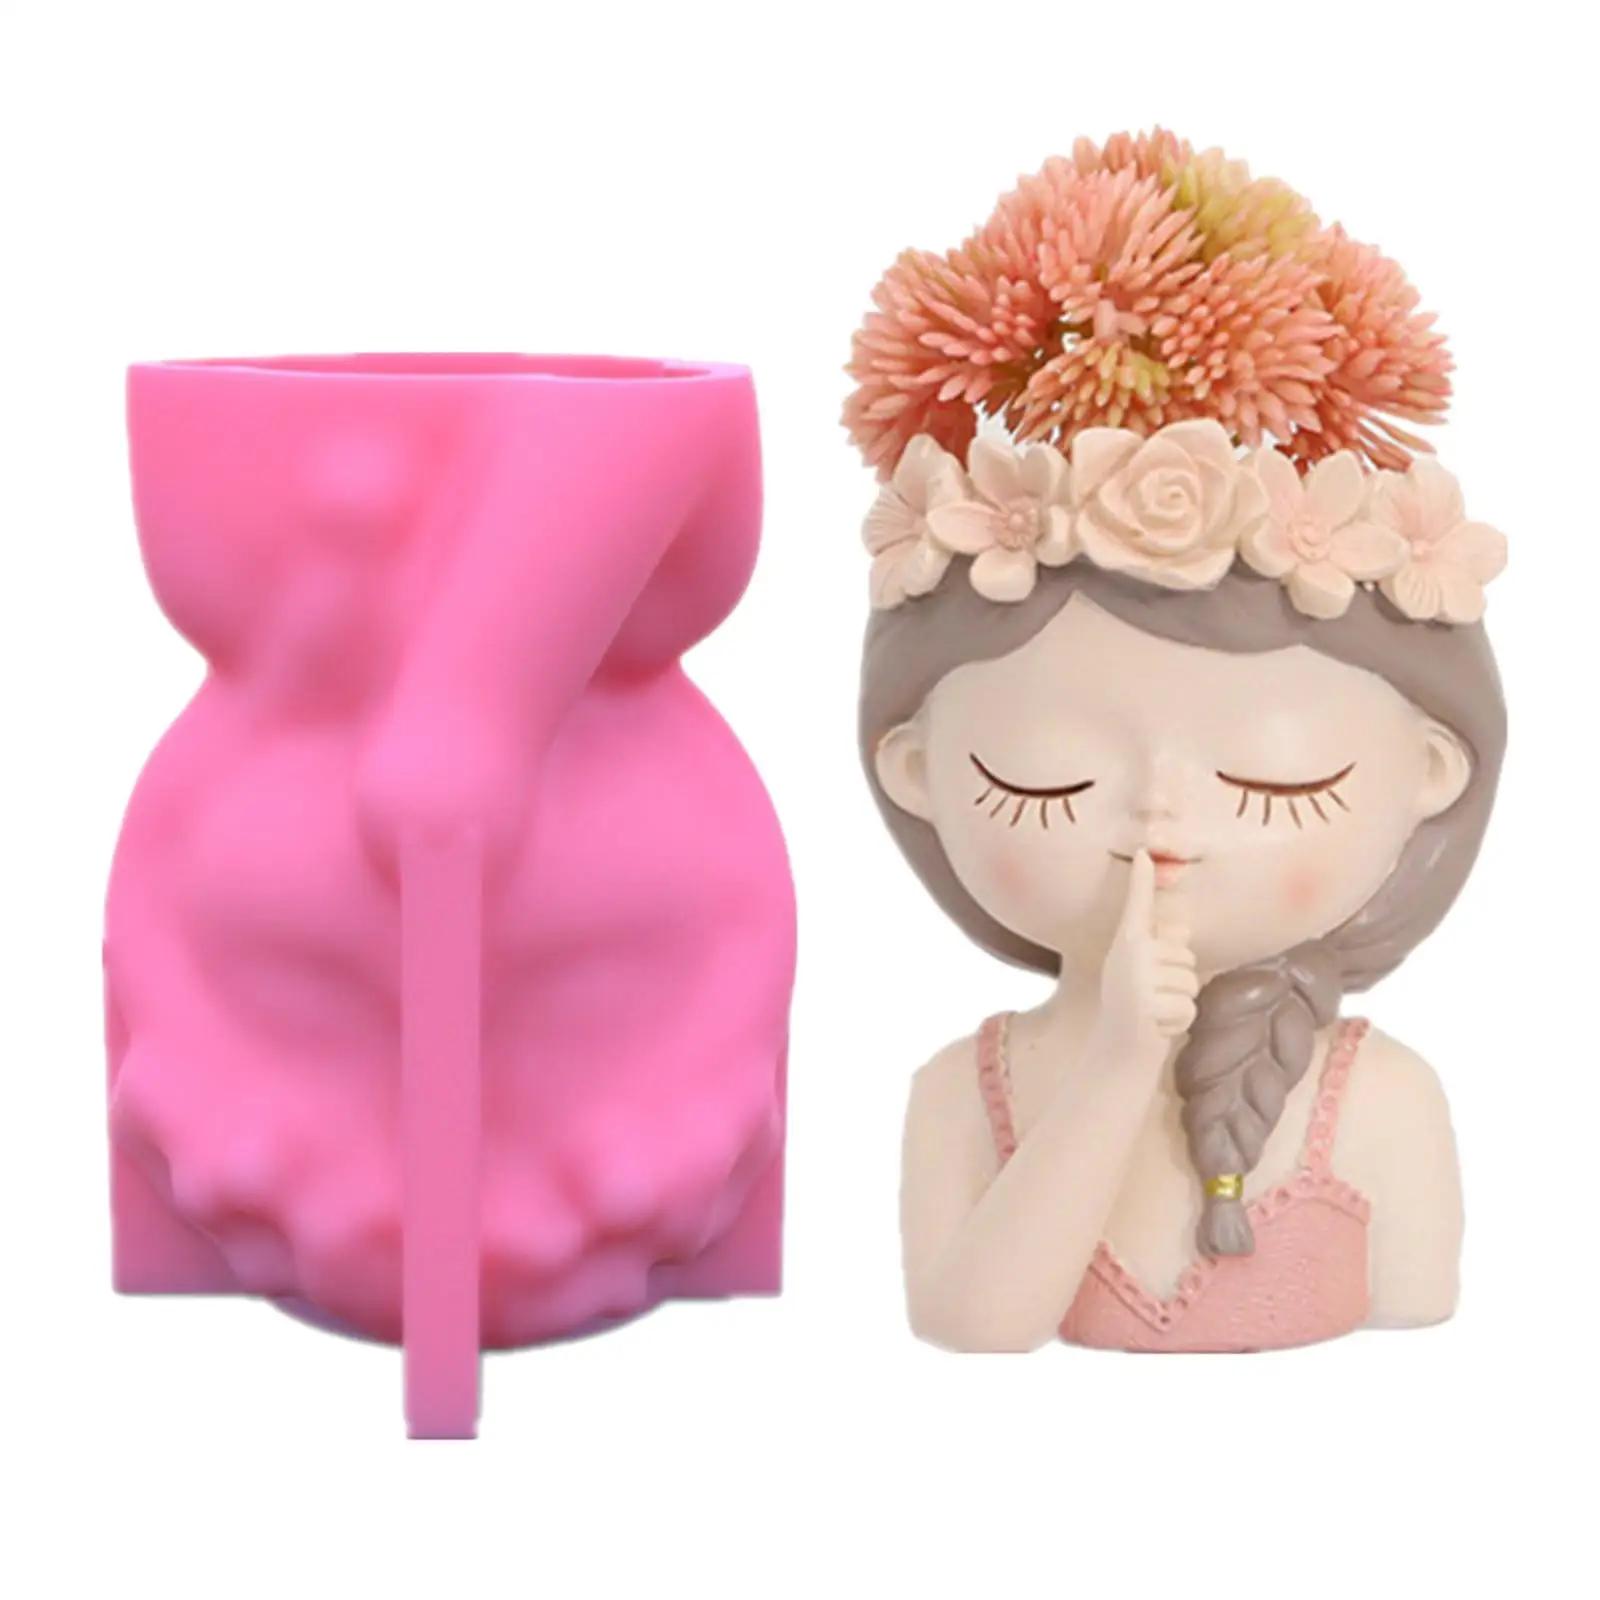 Silicone Mold 3D Girl Flowerpot Gypsum Resin Candle Concrete Crystal Glue Tool DIY Handmade Crafts Ornaments